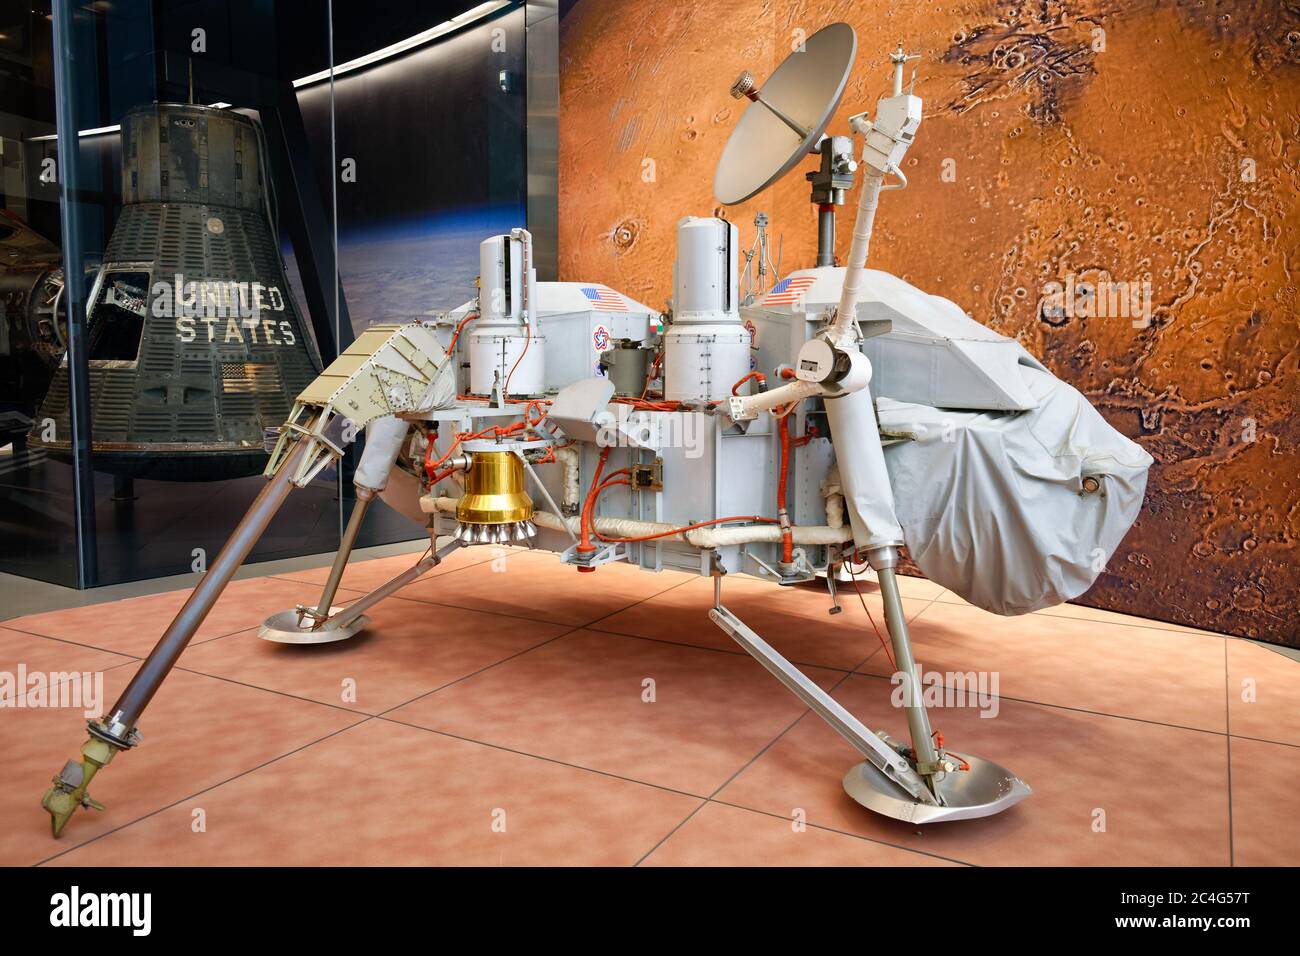 The proof test article of the famous Viking Mars Lander, which was used on Earth to simulate its behavior and to test its responses to radio commands. Stock Photo